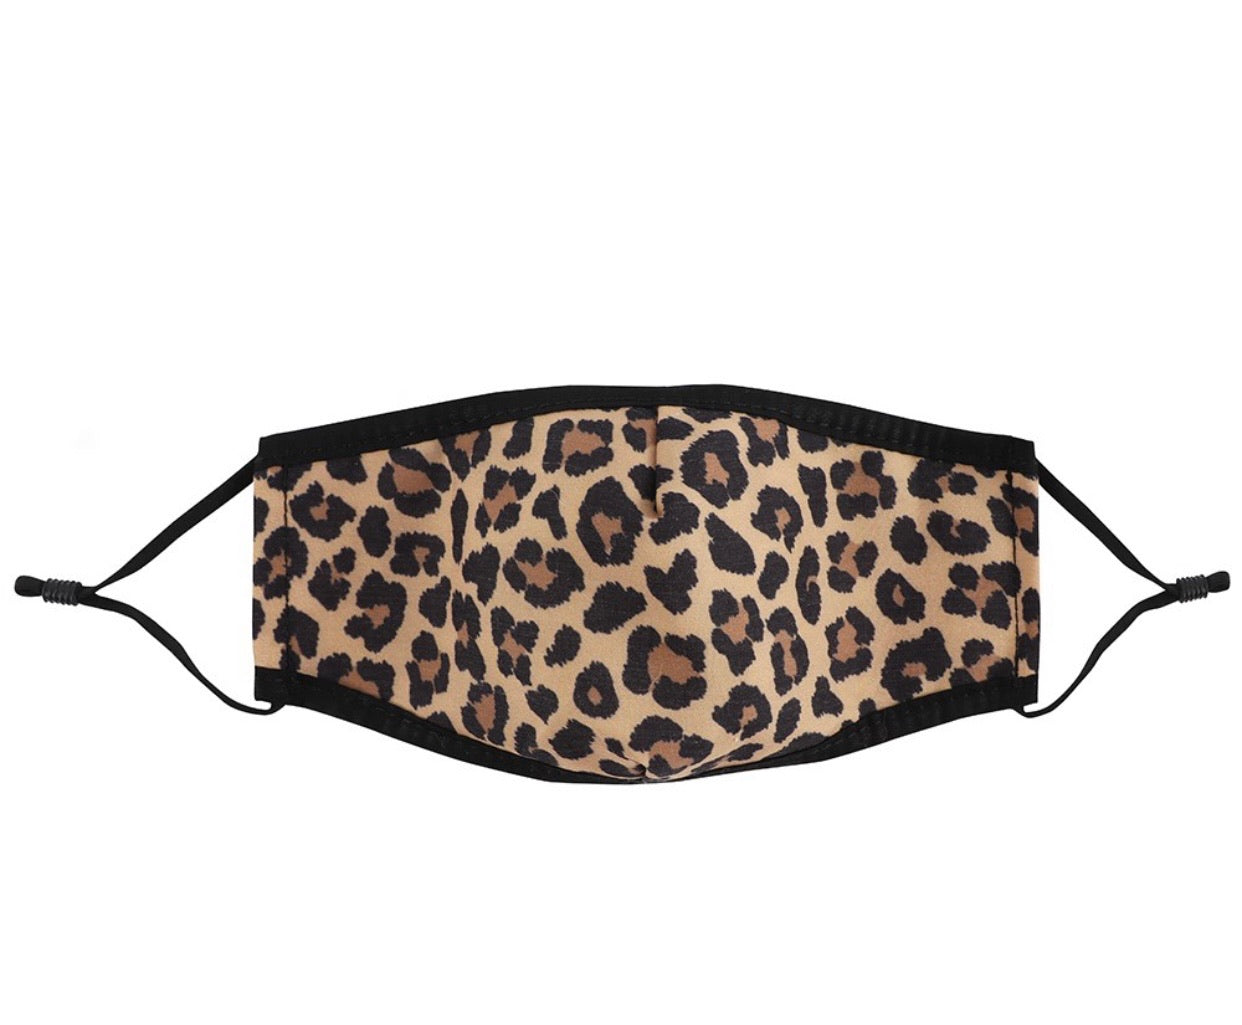 Leopard Print Re-useable Face Covering With Trim